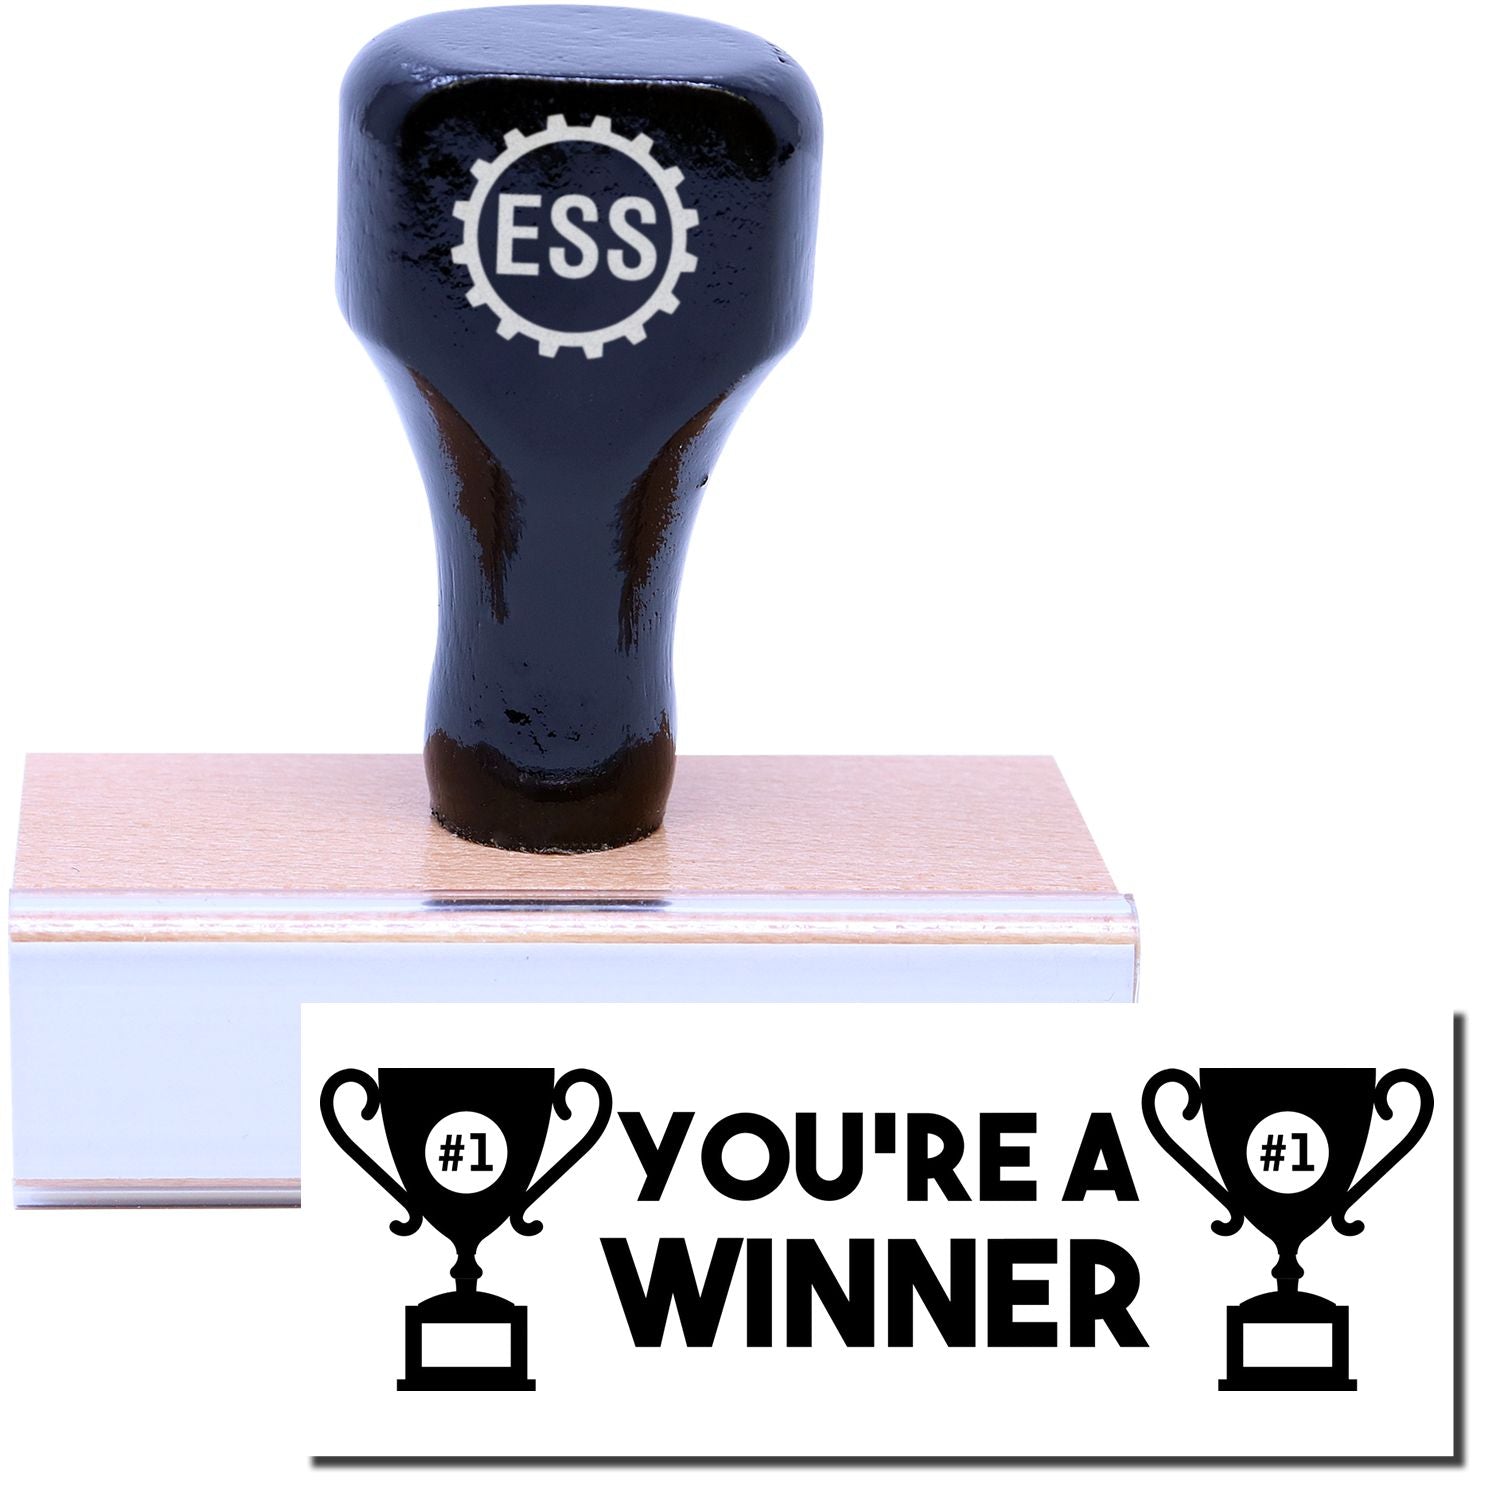 A stock office rubber stamp with a stamped image showing how the text "YOU'RE A WINNER" in a large bold font with images of a trophy with #1 inside on each side of the text is displayed after stamping.